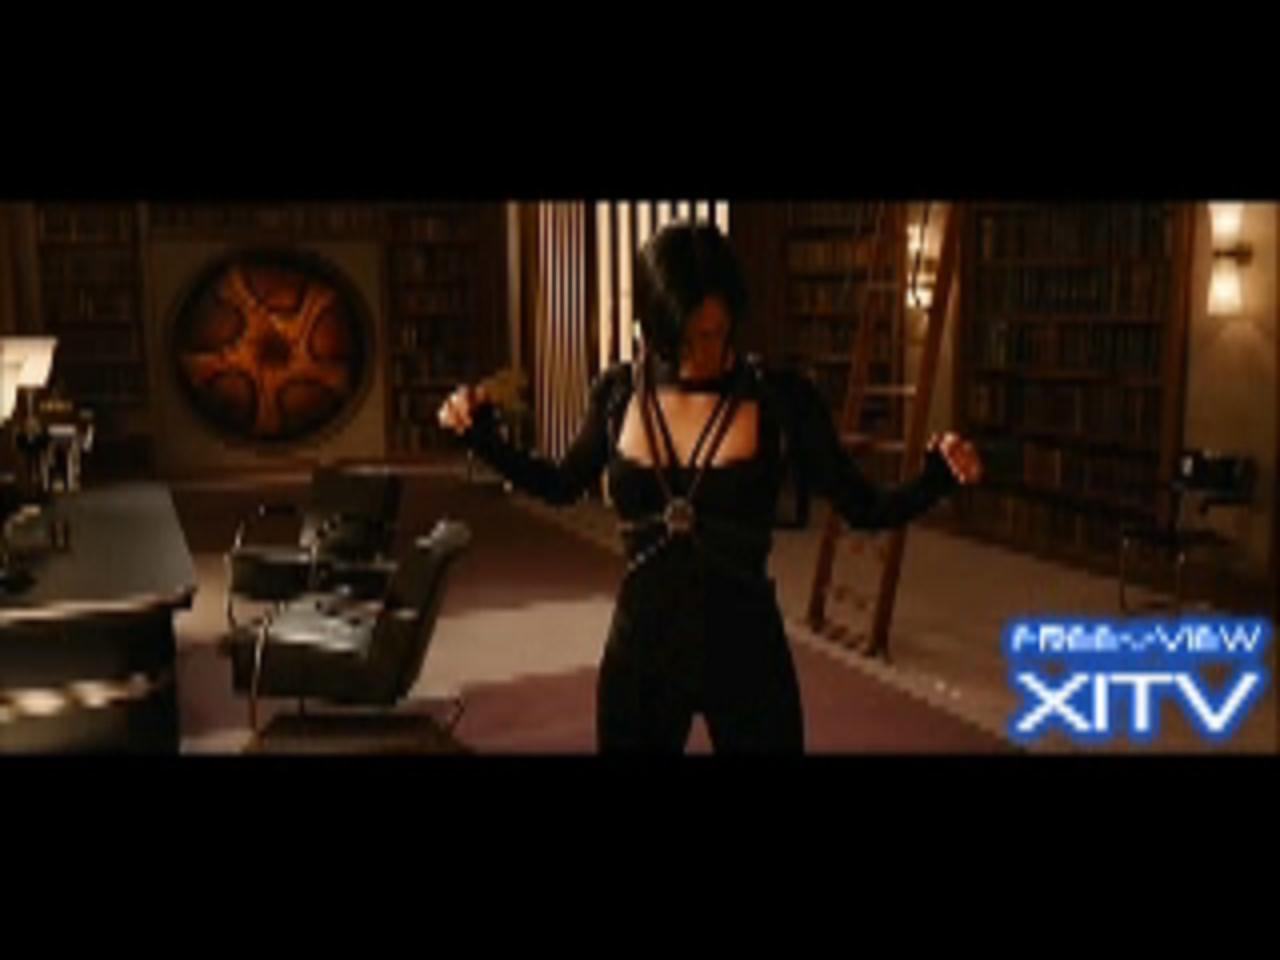 Watch Now! XITV FREE <> VIEW Aeon Flux! Starring Charlize Theron! XITV Is Must See TV!